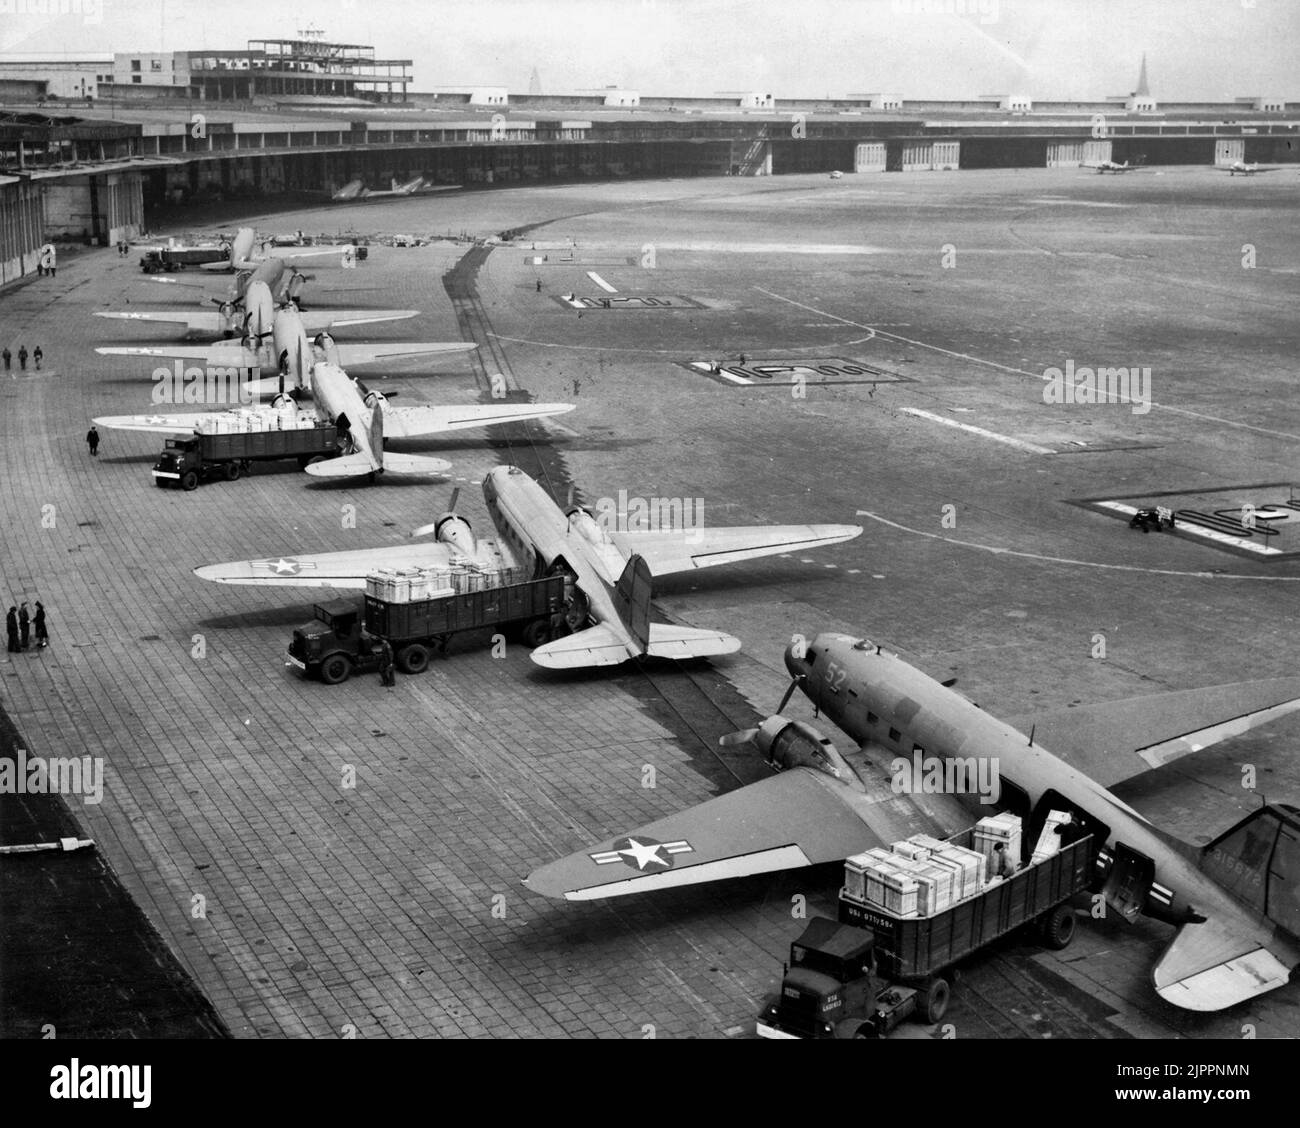 U.S. Navy Douglas R4D and U.S. Air Force C-47 aircraft unload at Tempelhof Airport during the Berlin Airlift. The first aircraft is a C-47A-90-DL - 1948 Stock Photo